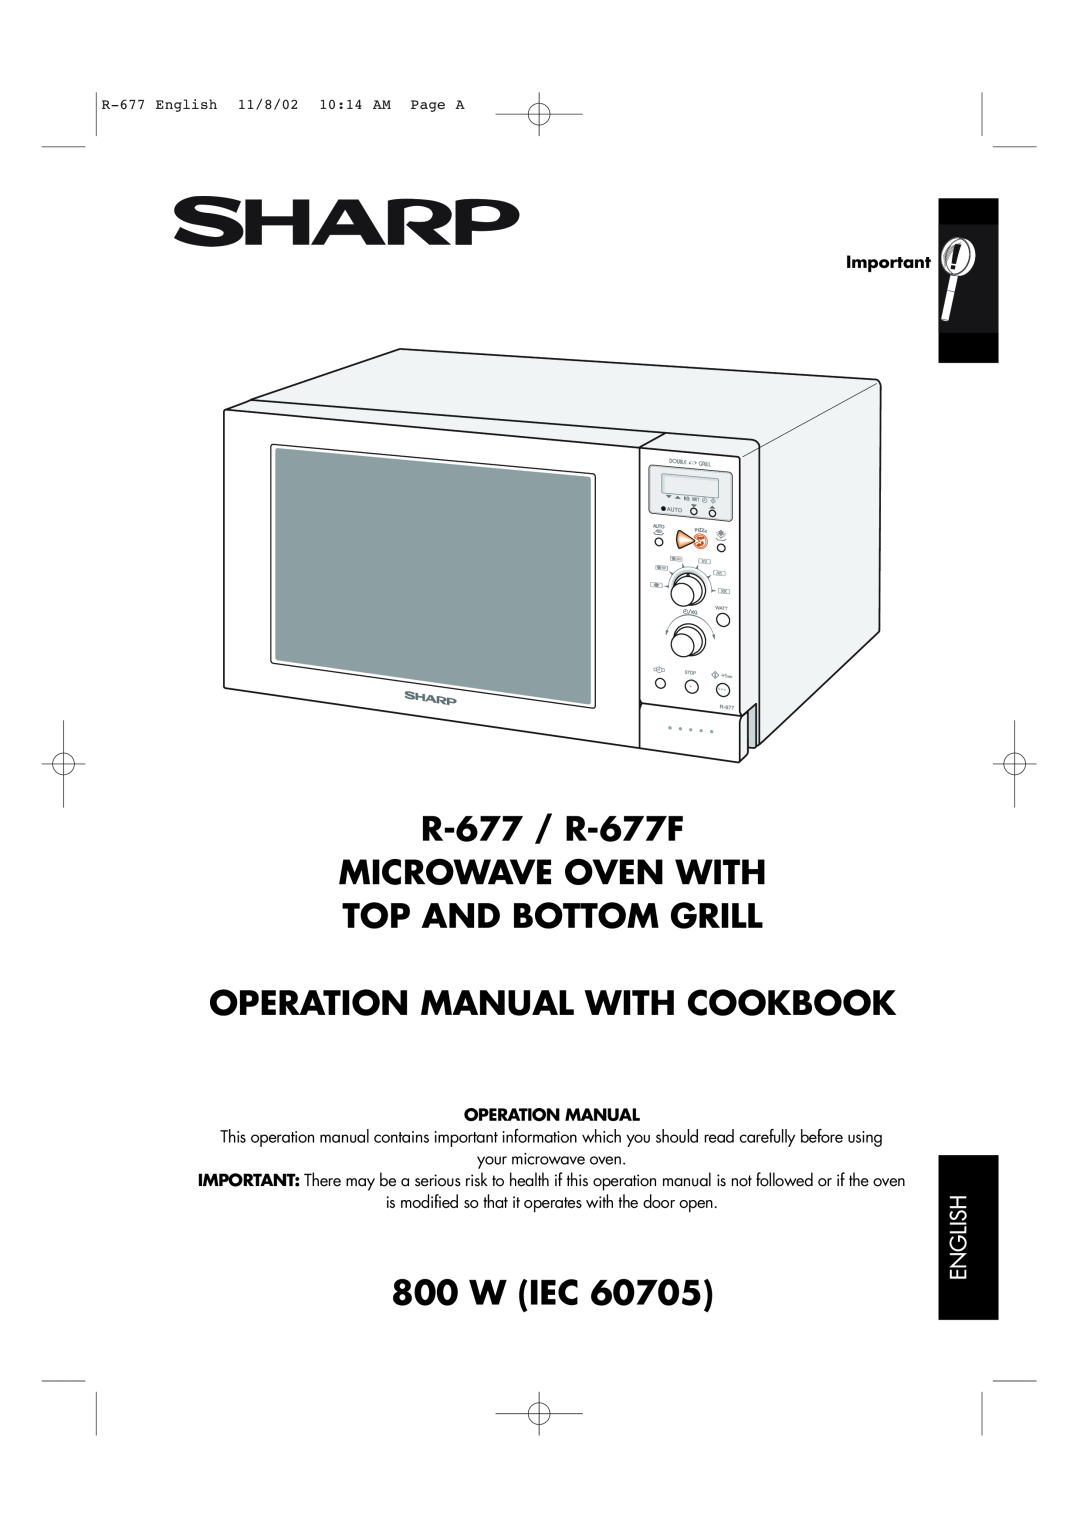 Sharp operation manual English, R-677 / R-677F MICROWAVE OVEN WITH, Top And Bottom Grill, W Iec 